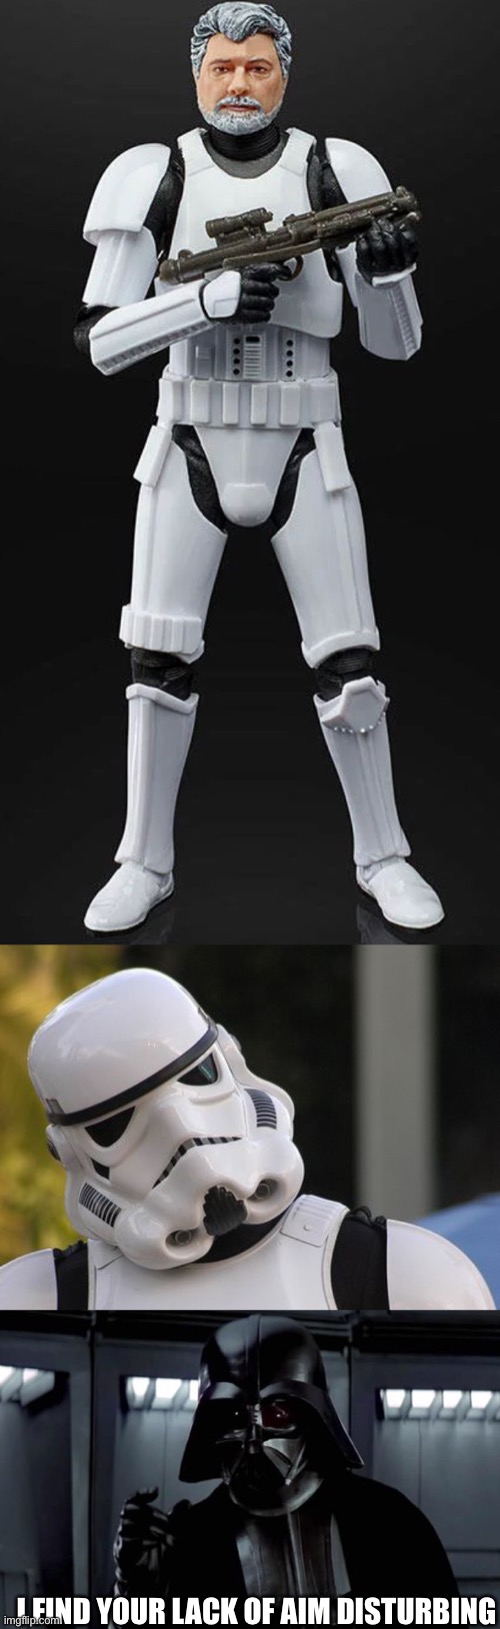  I FIND YOUR LACK OF AIM DISTURBING | image tagged in confused stormtrooper,darth vader | made w/ Imgflip meme maker